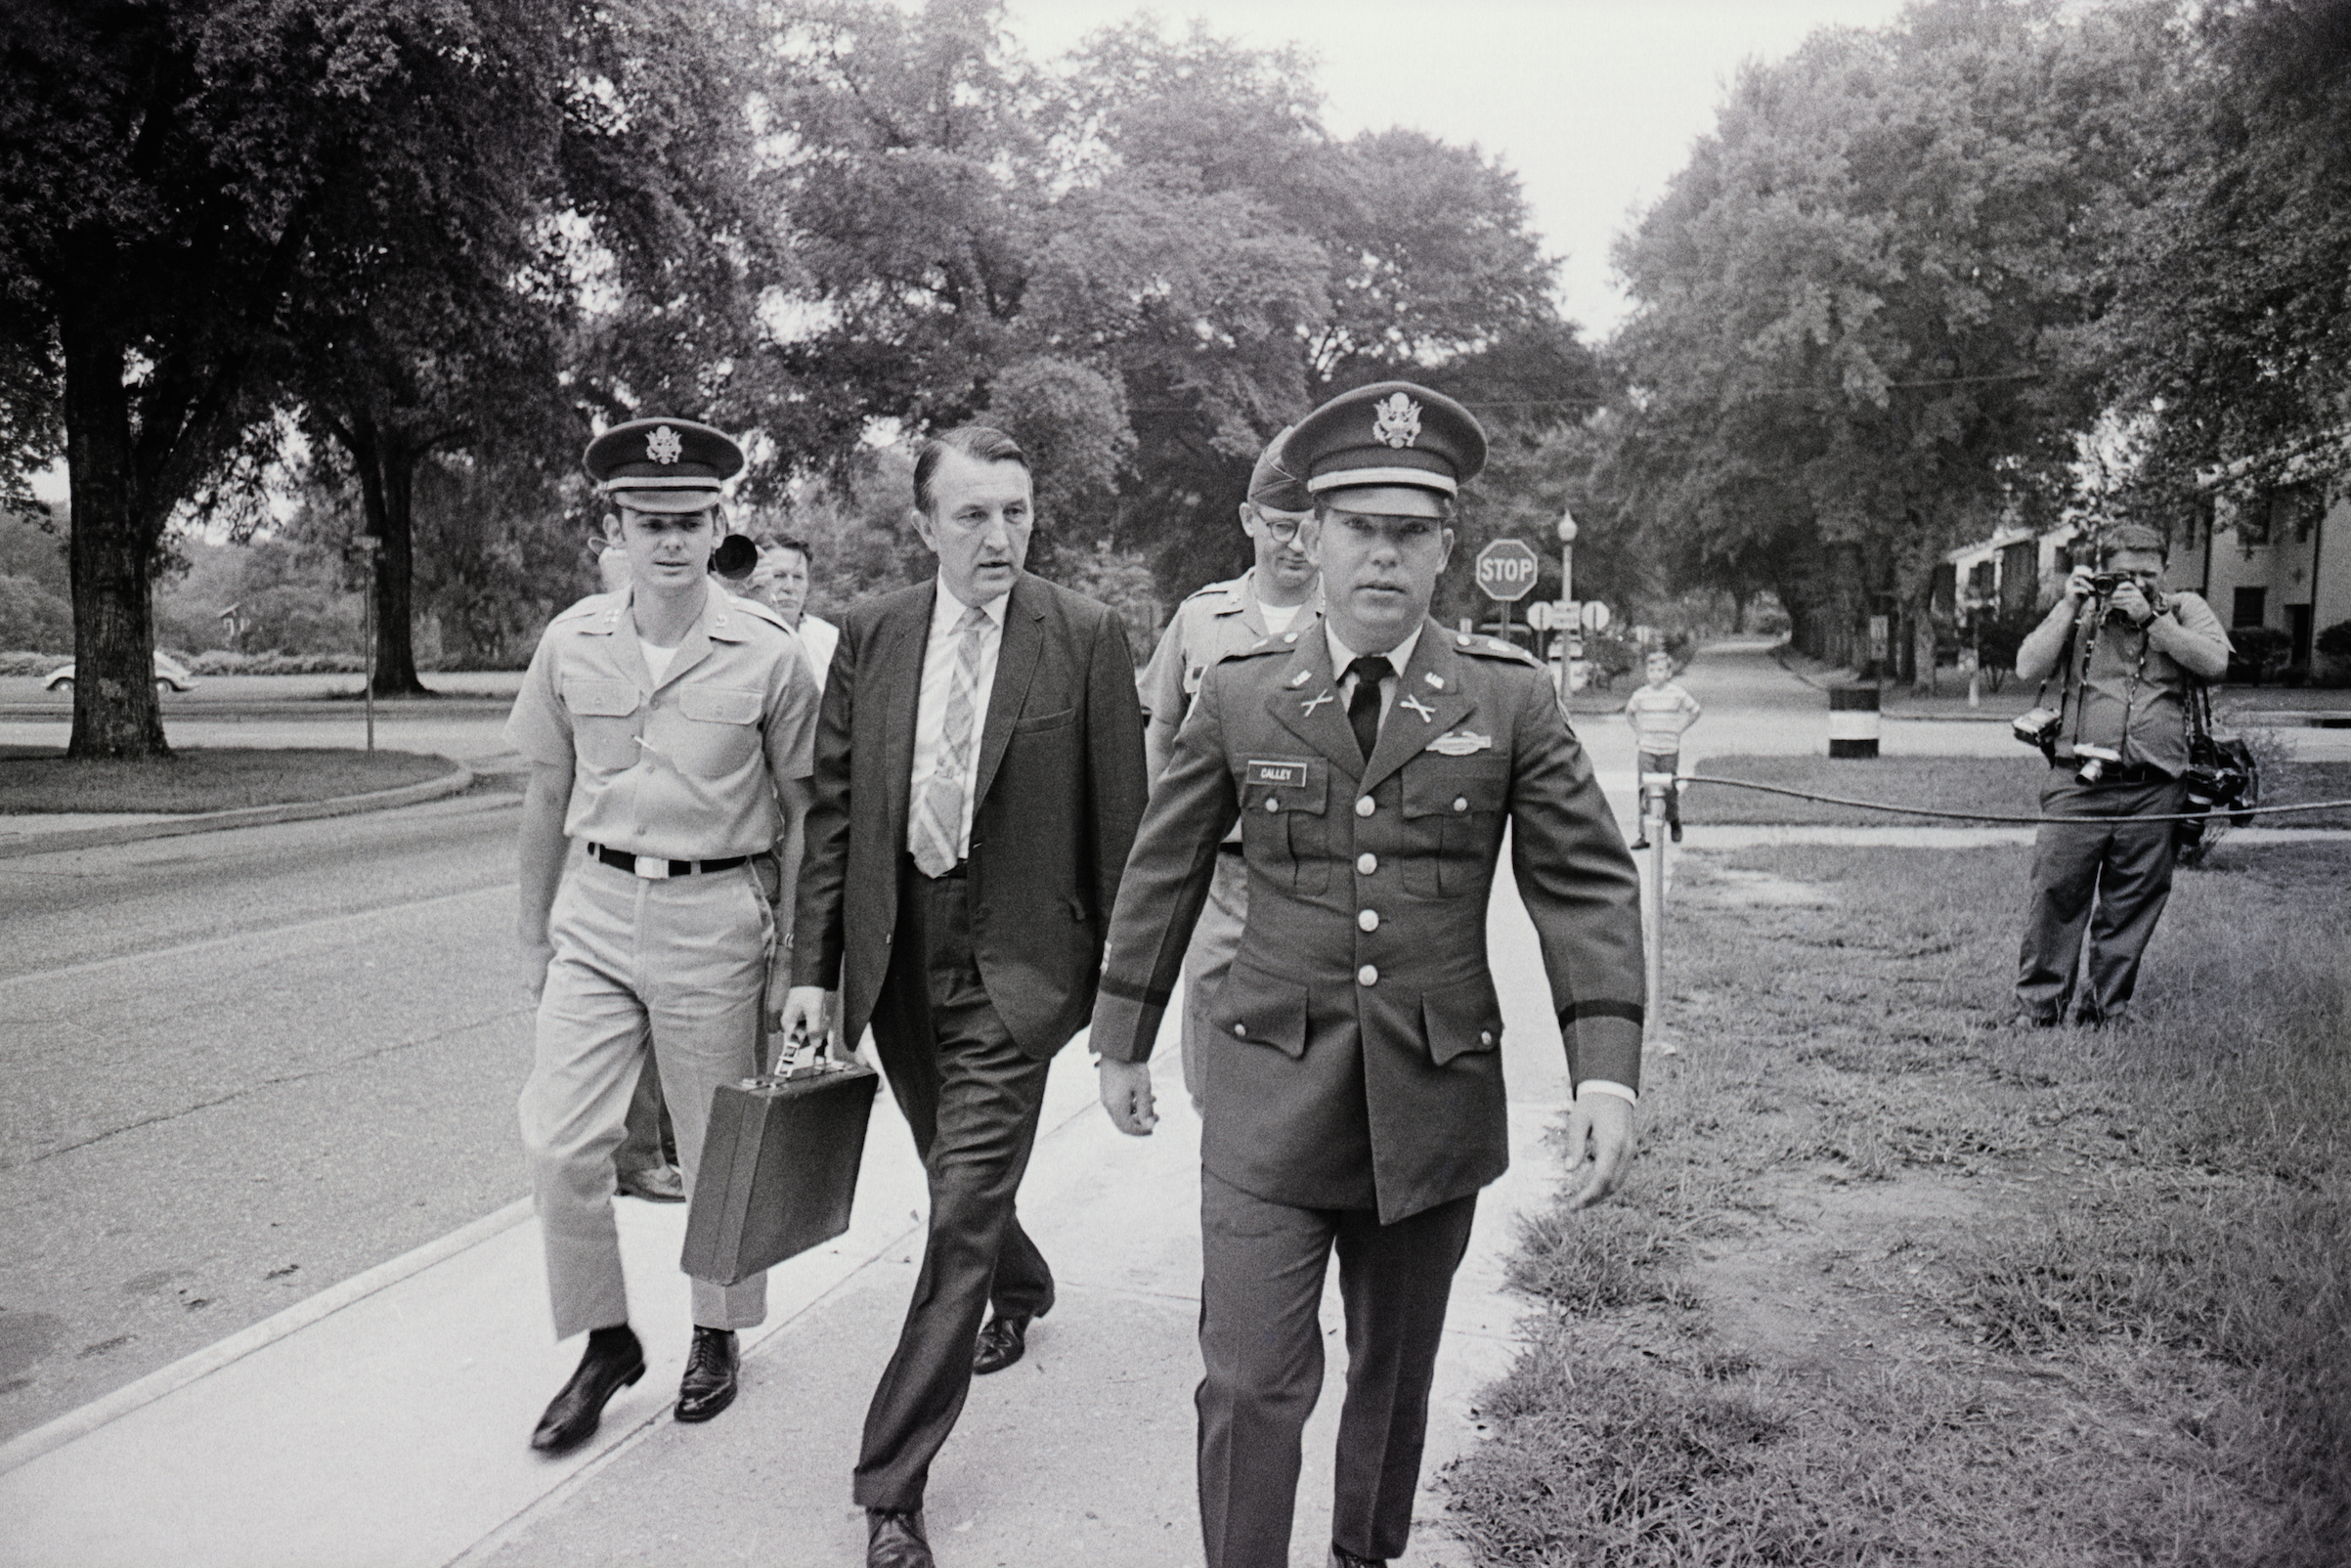 Lieutenant William Calley is flanked by an unidentified civilian assistant attorney (L) and an unidentified Army escort officer as he leaves a closed-door preliminary court martial hearing on Aug. 24, 1970, at Fort Benning, Ga. (Bettmann/Getty Images)